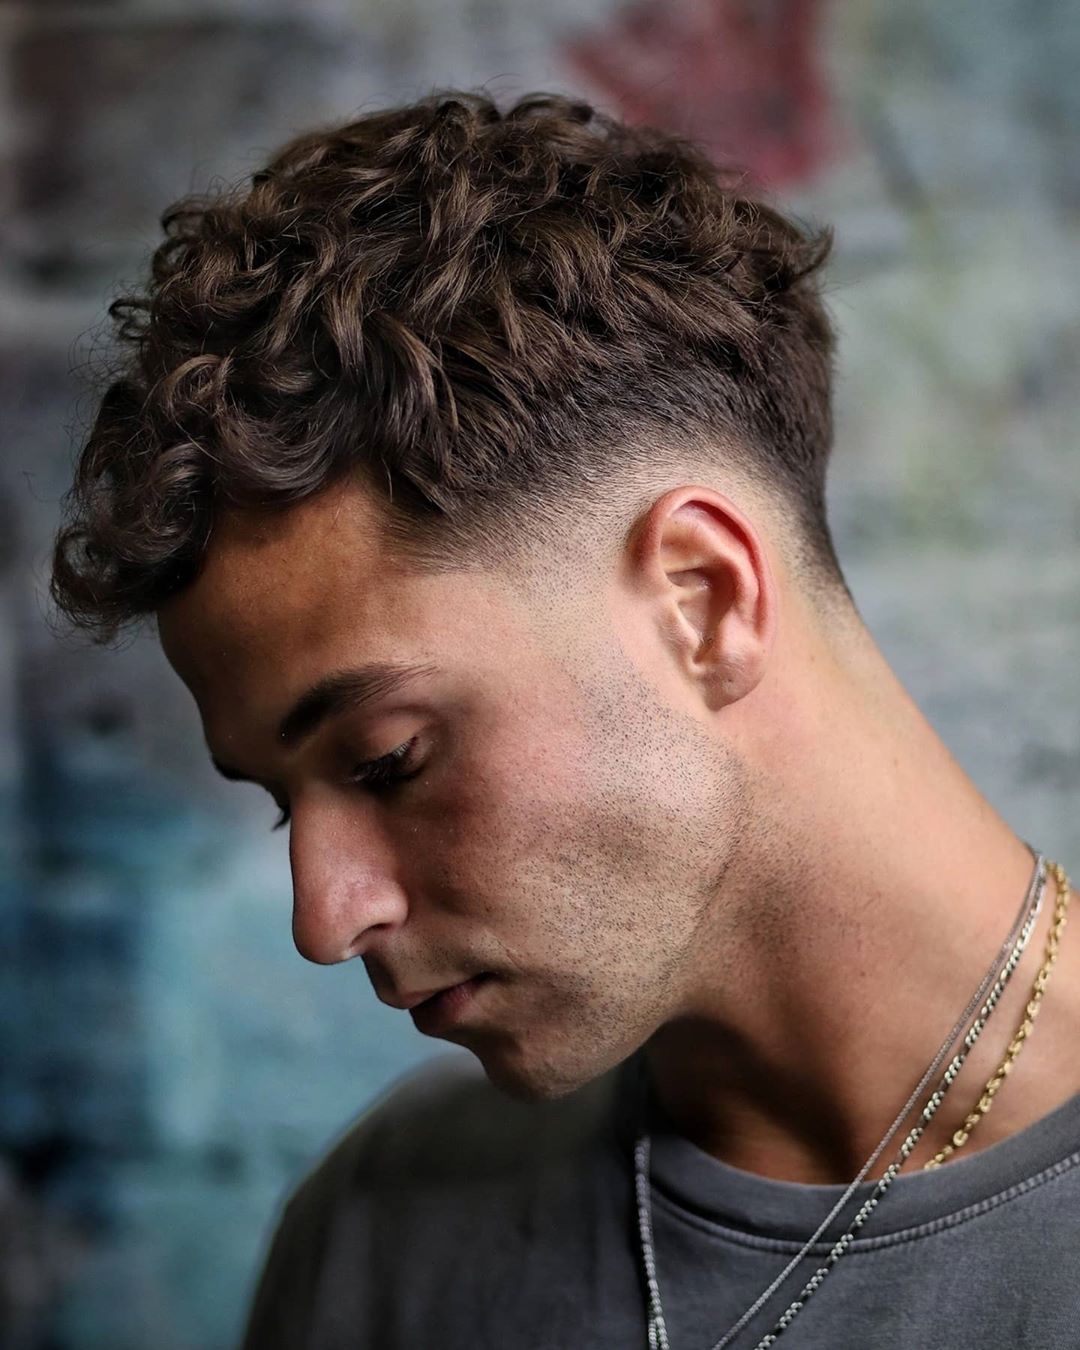 Crop Haircuts For Men 35 Fresh Looks For Straight + Curly Hair